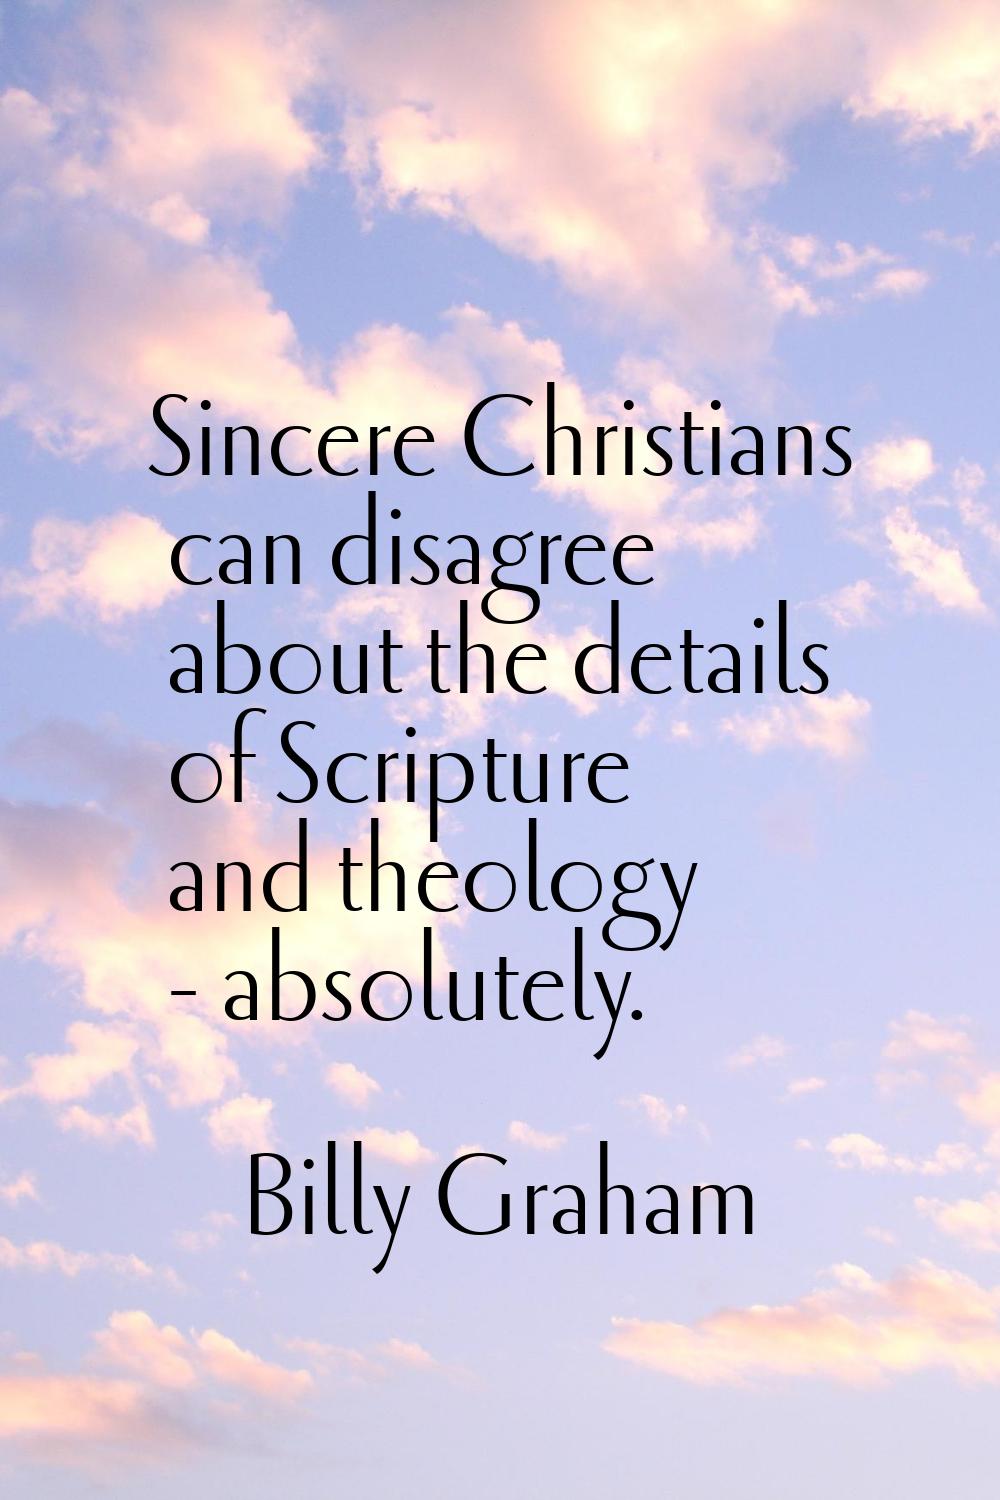 Sincere Christians can disagree about the details of Scripture and theology - absolutely.